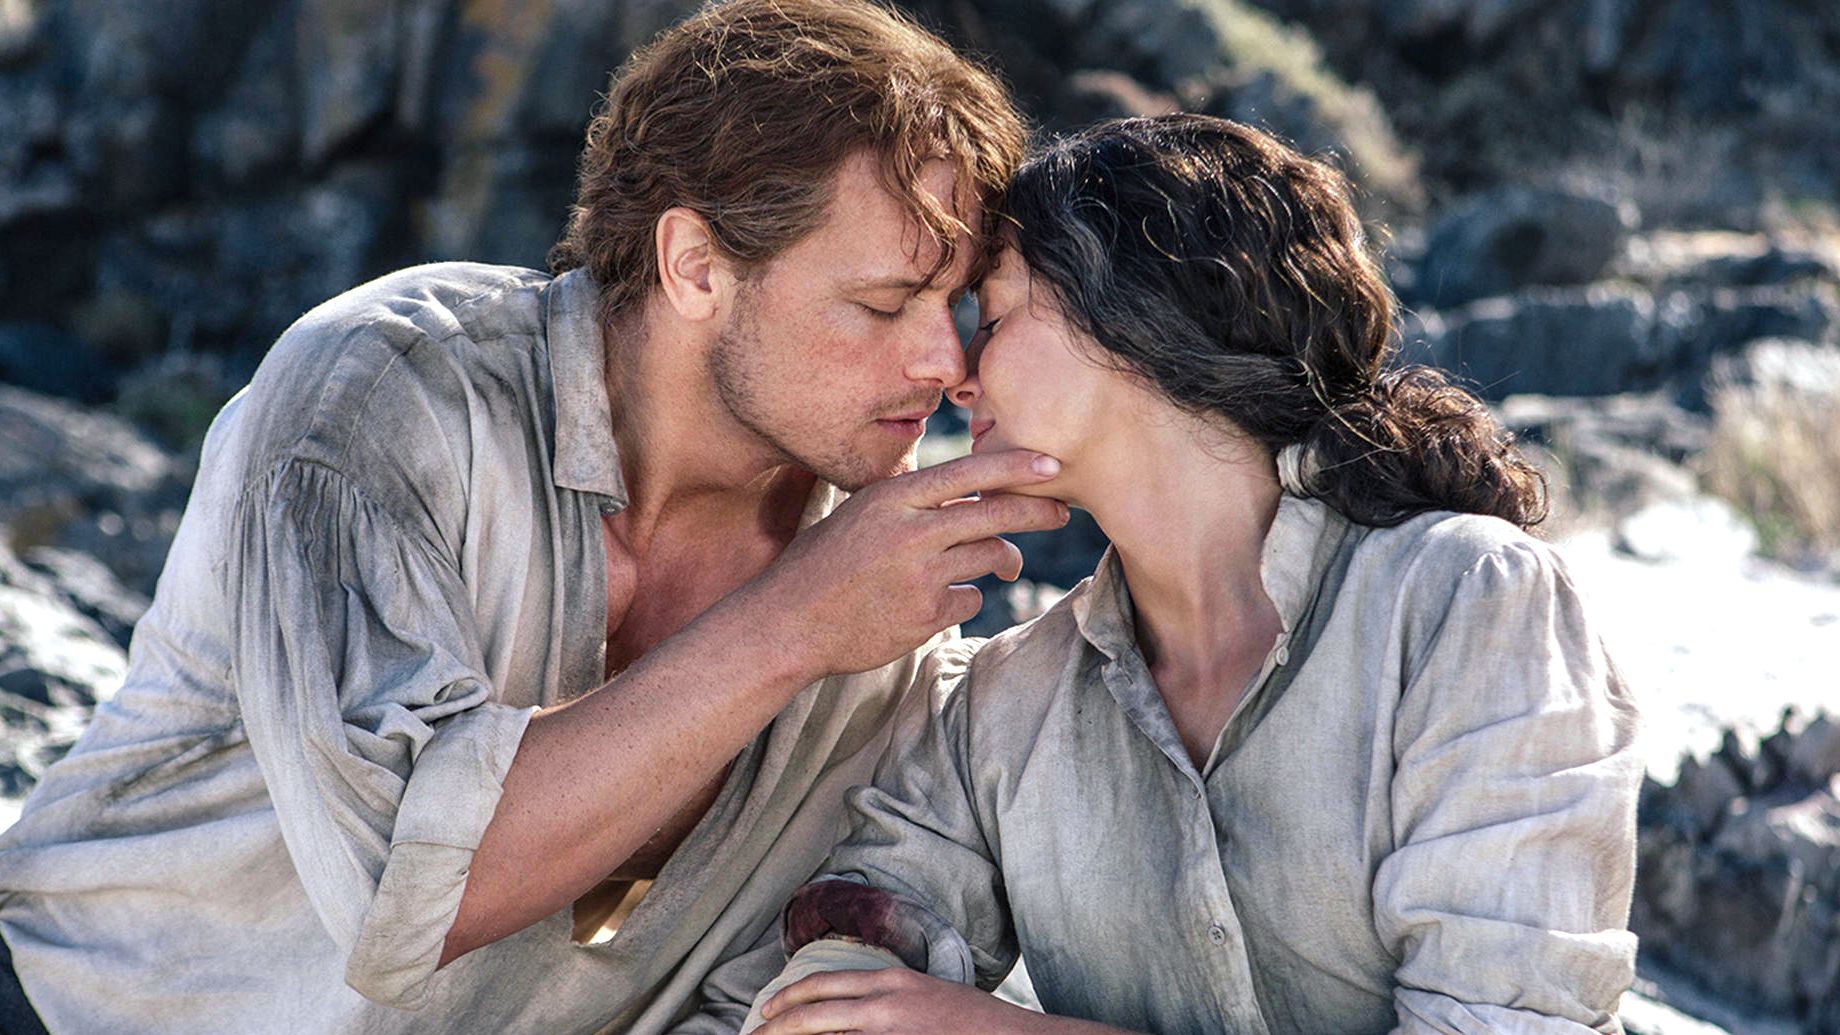 Kissing On Nude Beach - Everything You Need to Know About 'Outlander' Season 4 - Outlander Season 4  Facts | Marie Claire